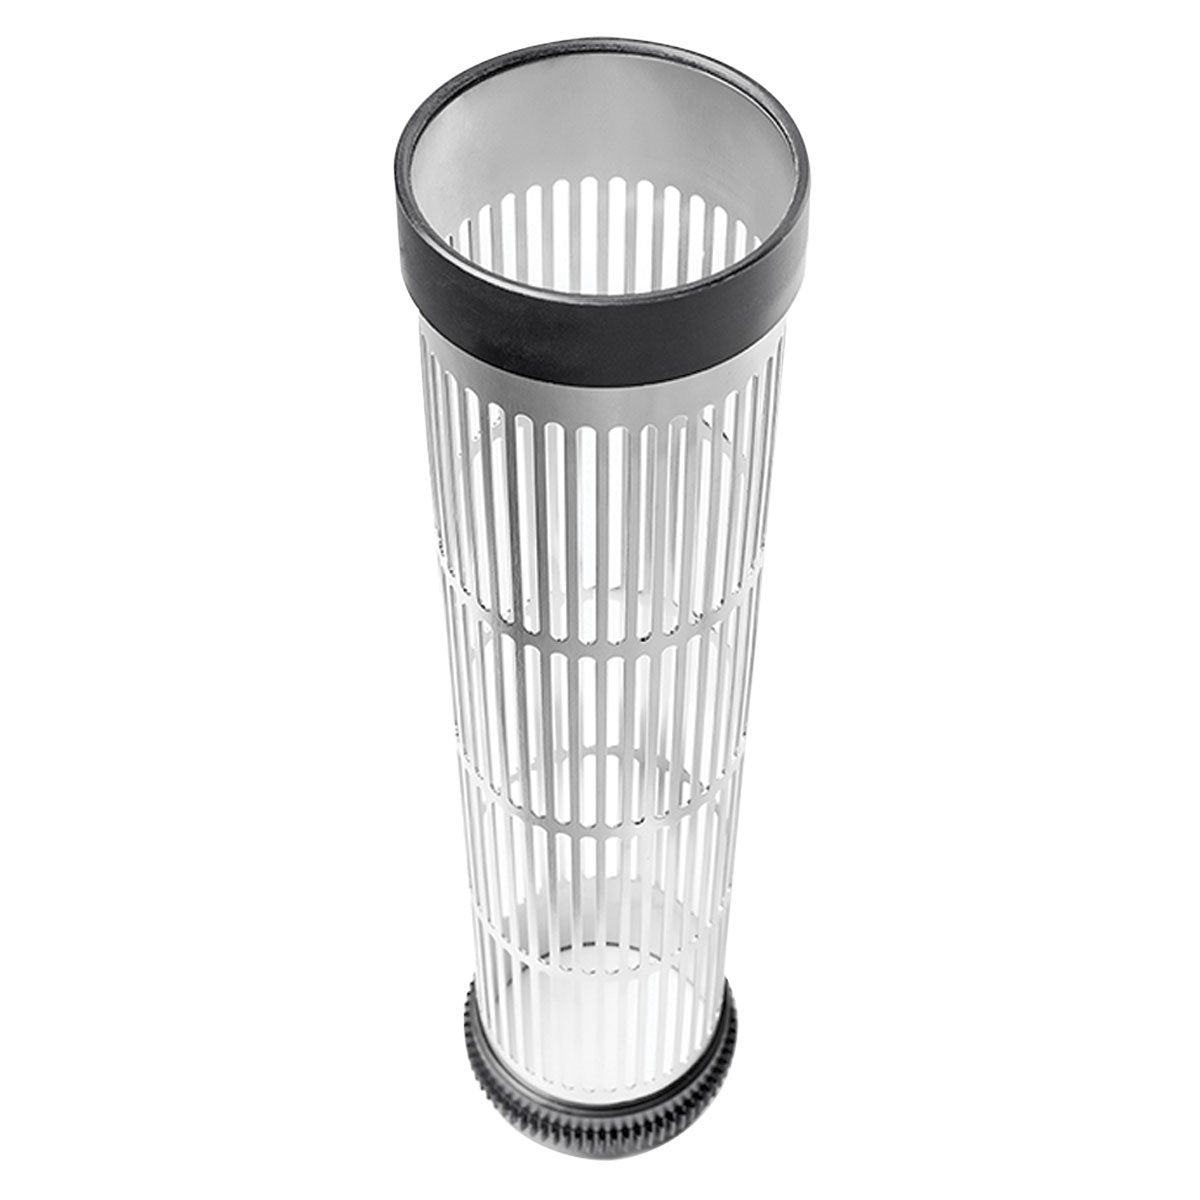 Twister T6 Extreme Tumbler 1 4-Canada grow supply